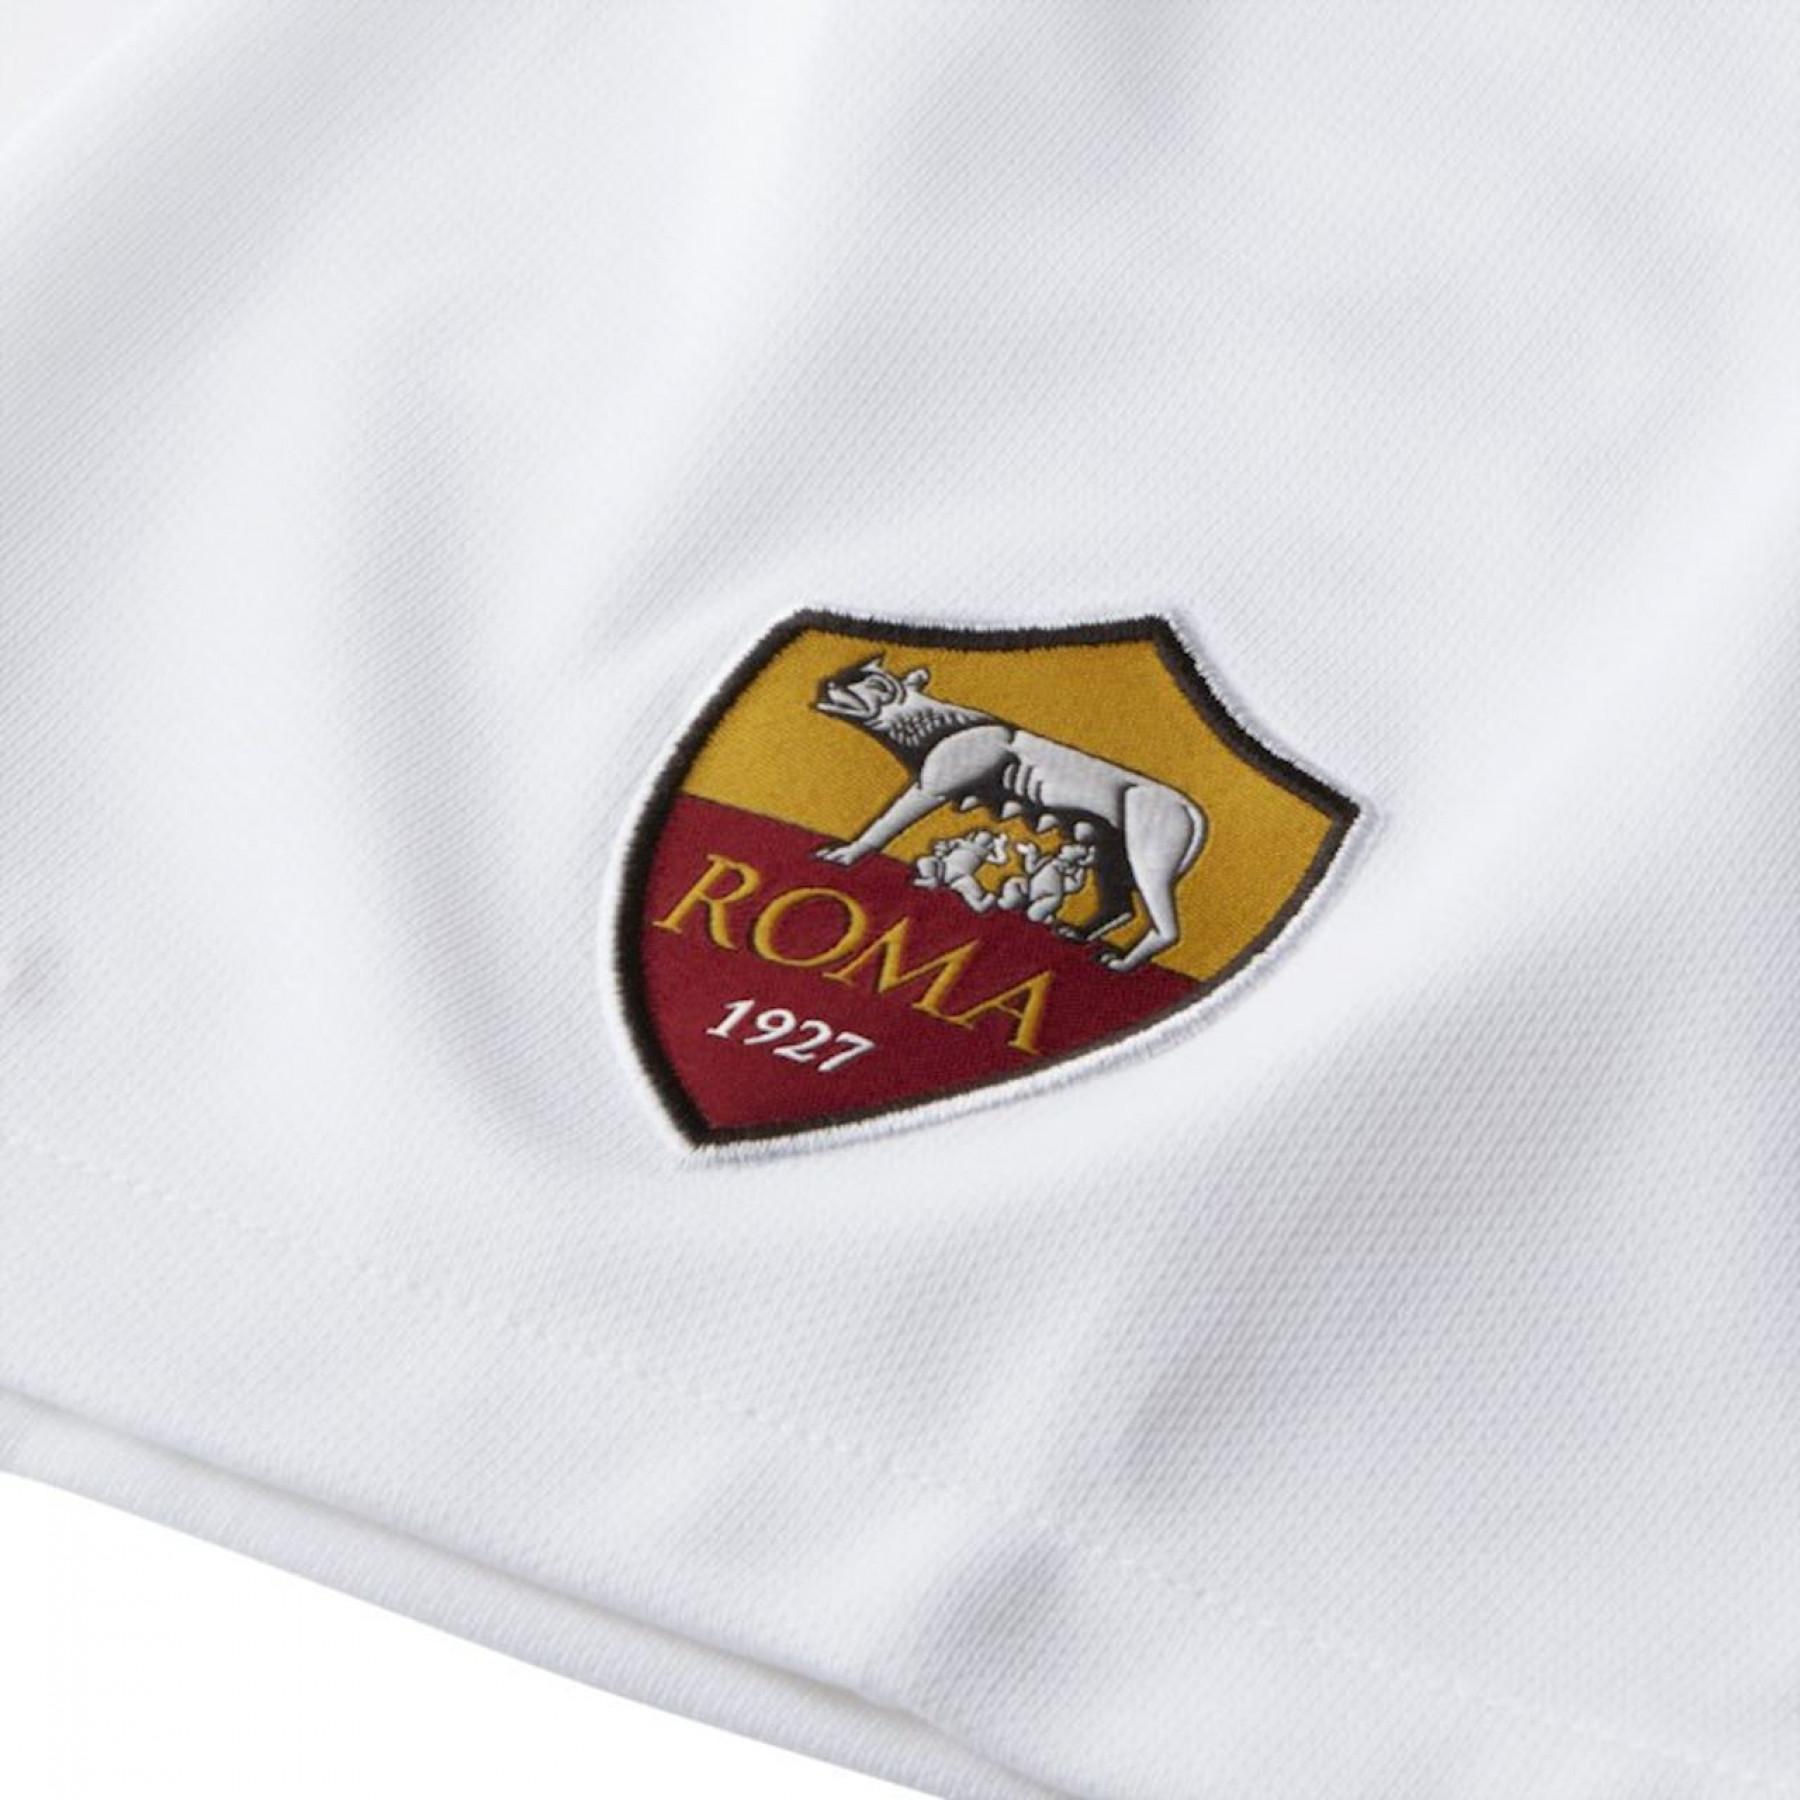 Short thuis kind AS Roma 2019/20